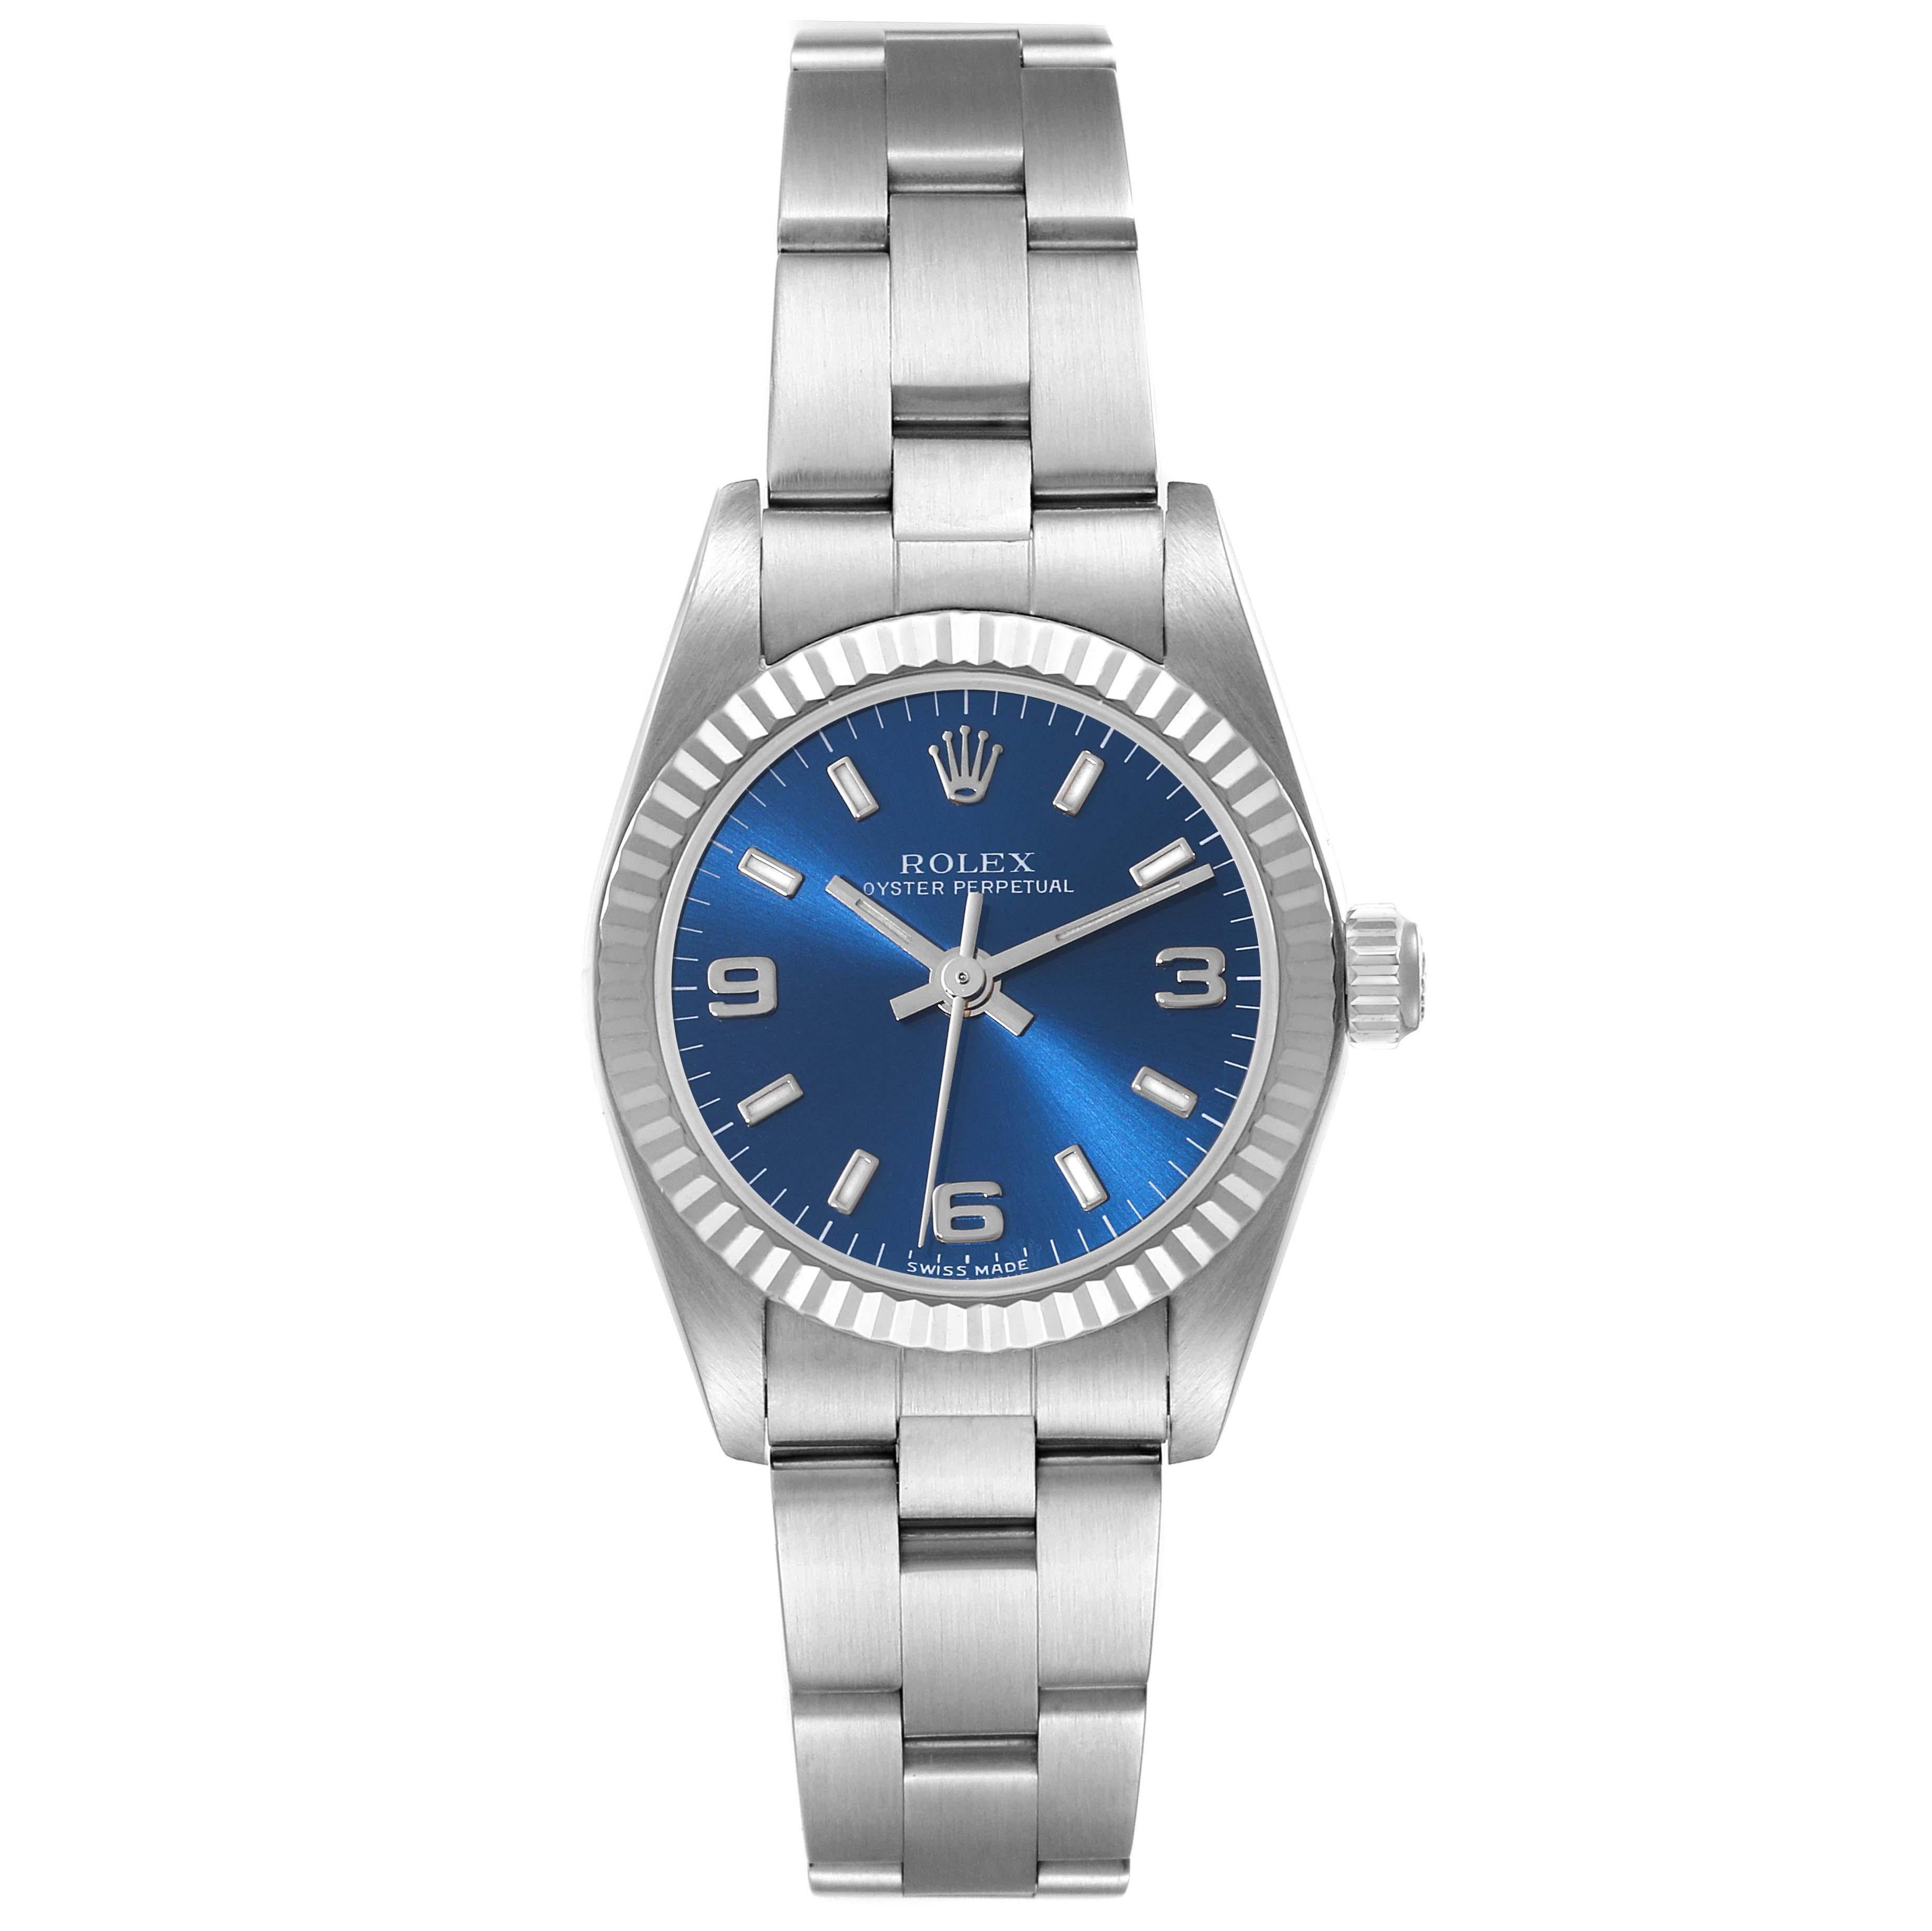 Rolex Oyster Perpetual Blue Dial Steel White Gold Ladies Watch 76094. Officially certified chronometer automatic self-winding movement. Stainless steel oyster case 24.0 mm in diameter. Rolex logo on the crown. 18k white gold fluted bezel. Scratch